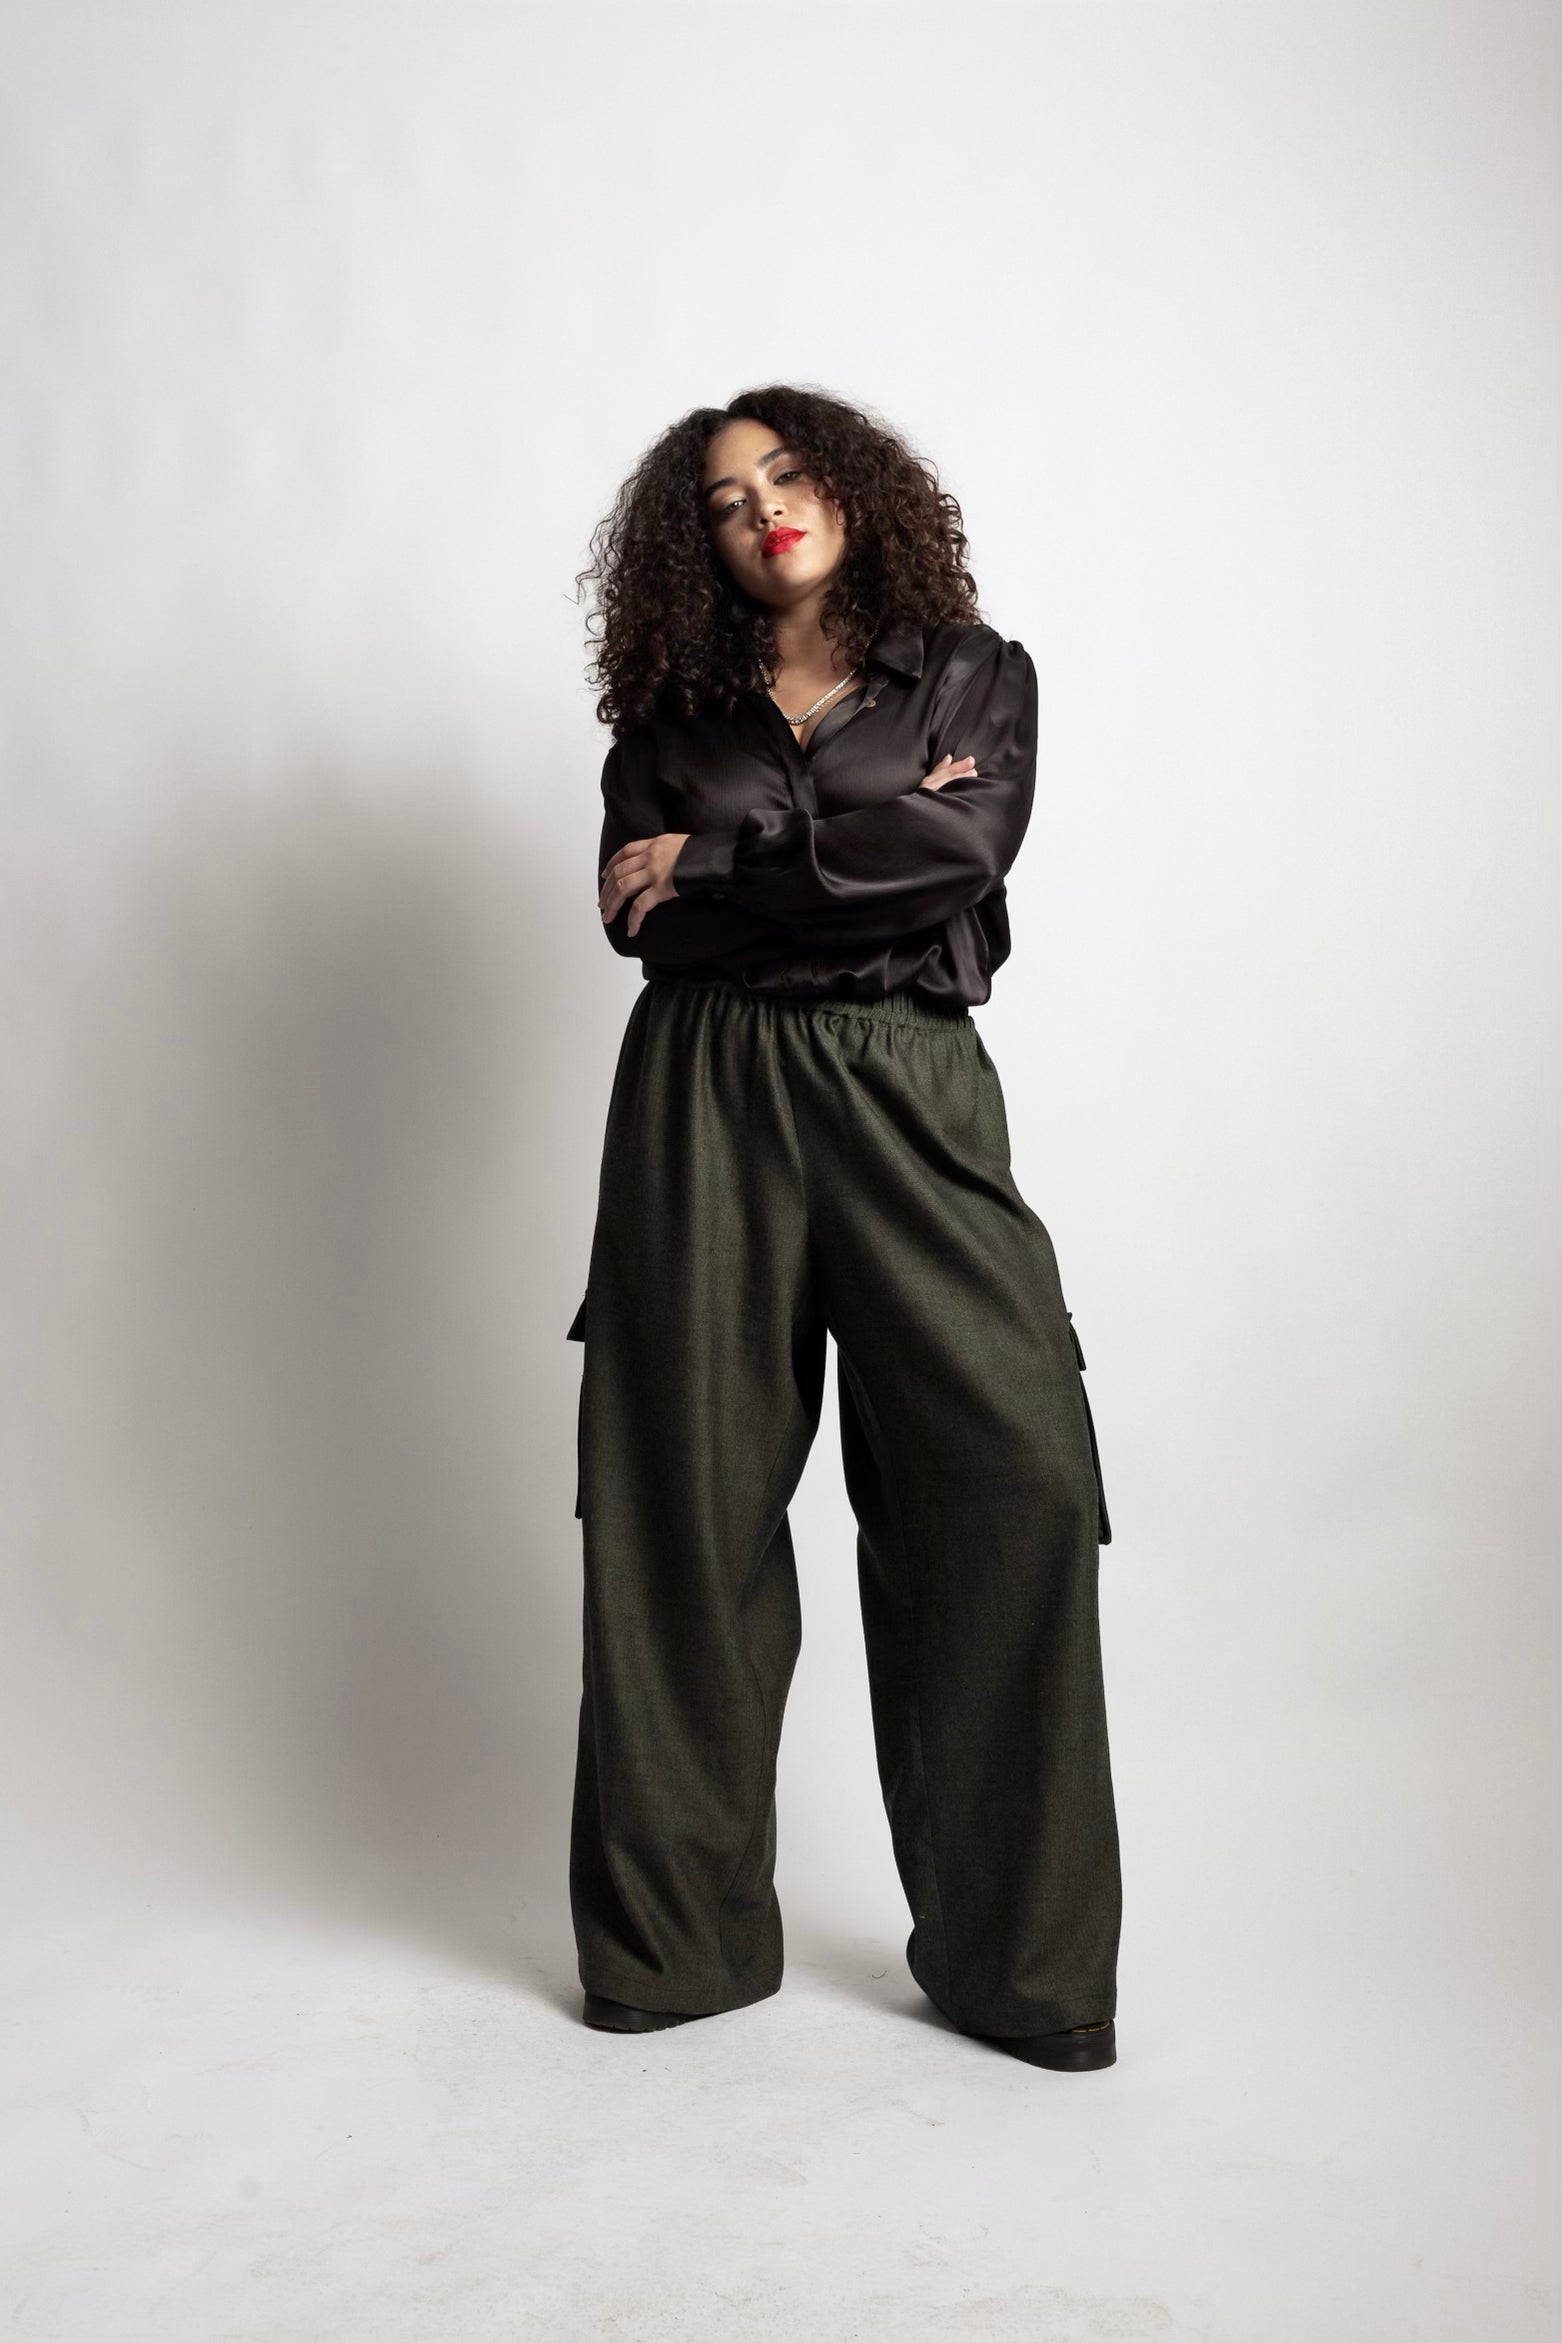 model wearing black Sigourney top and cargo pants